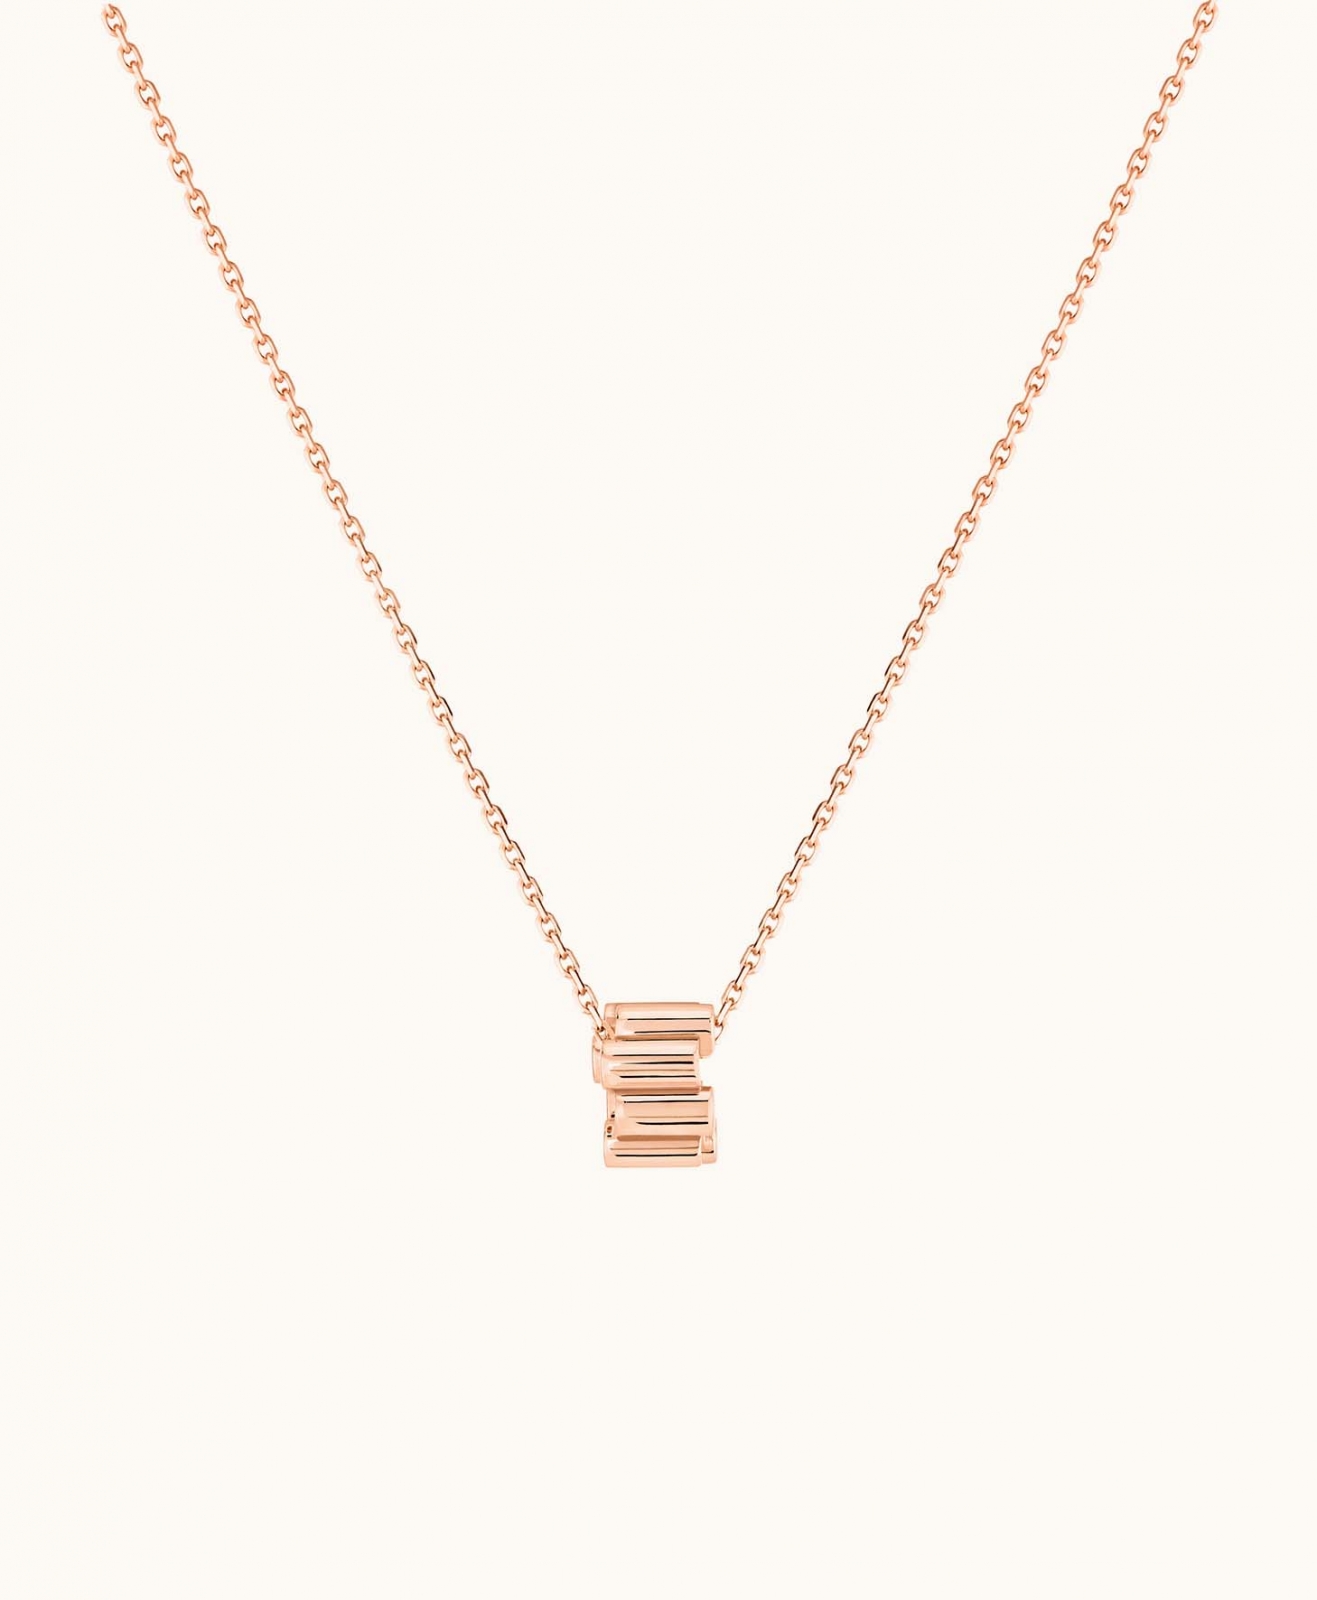 Edge Gold Necklace